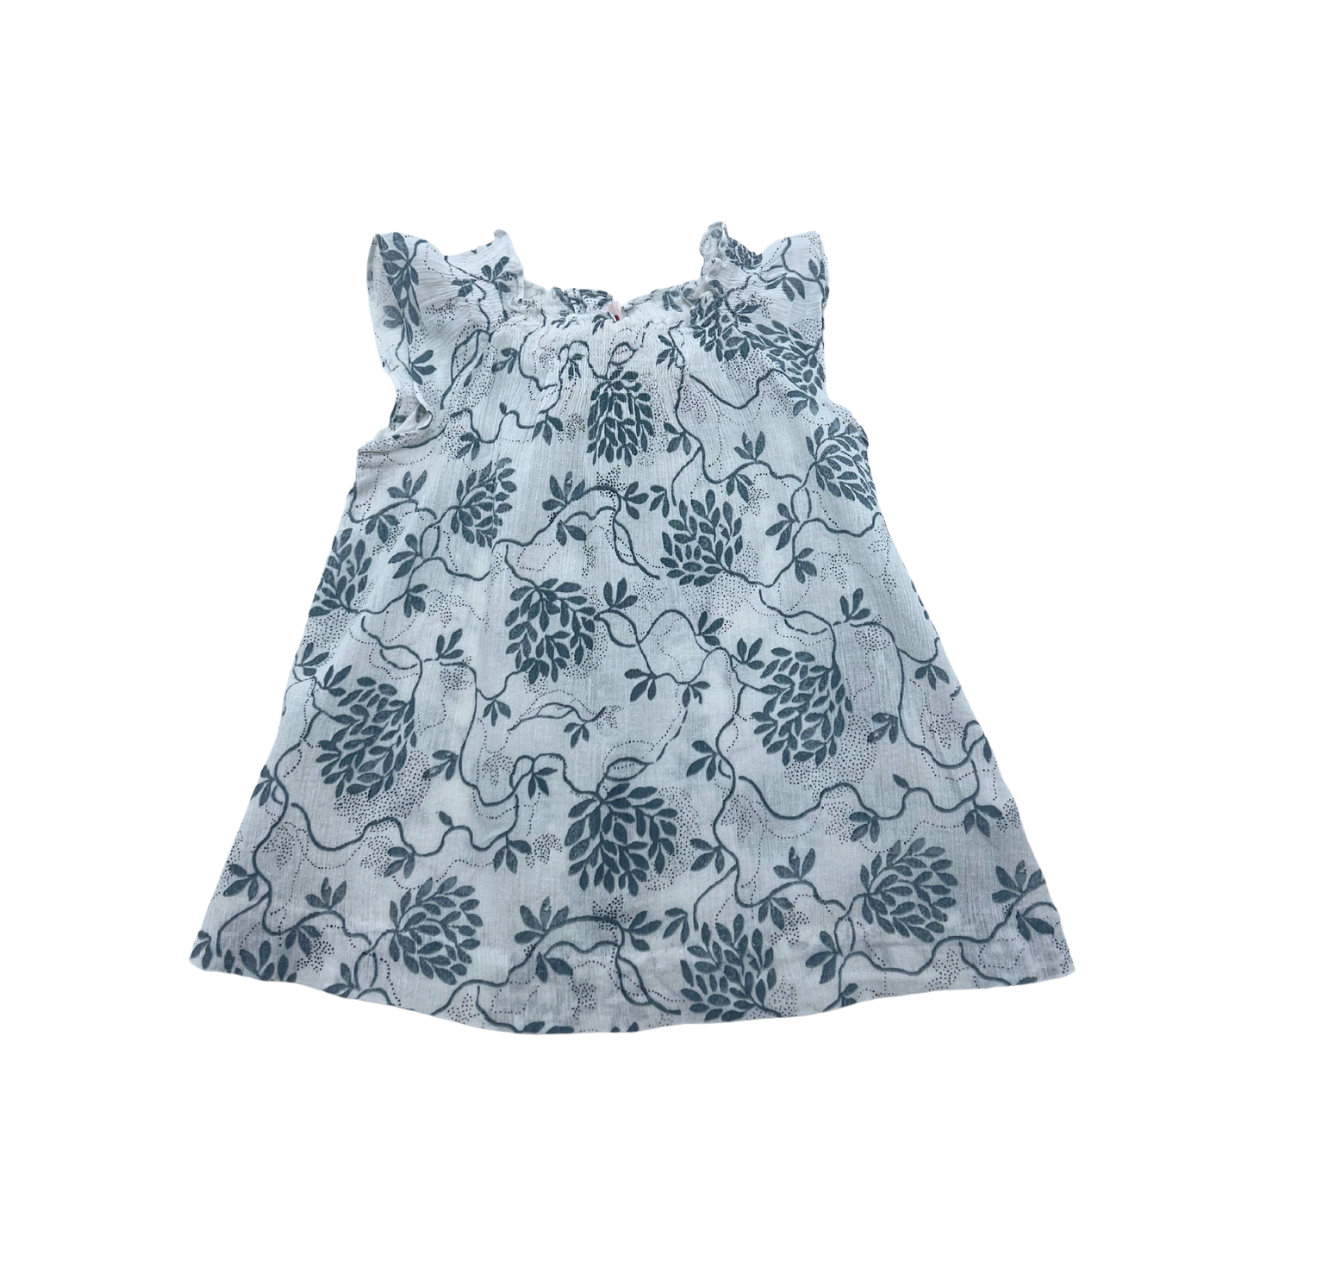 BONPOINT - Floral blouse - 6 years old